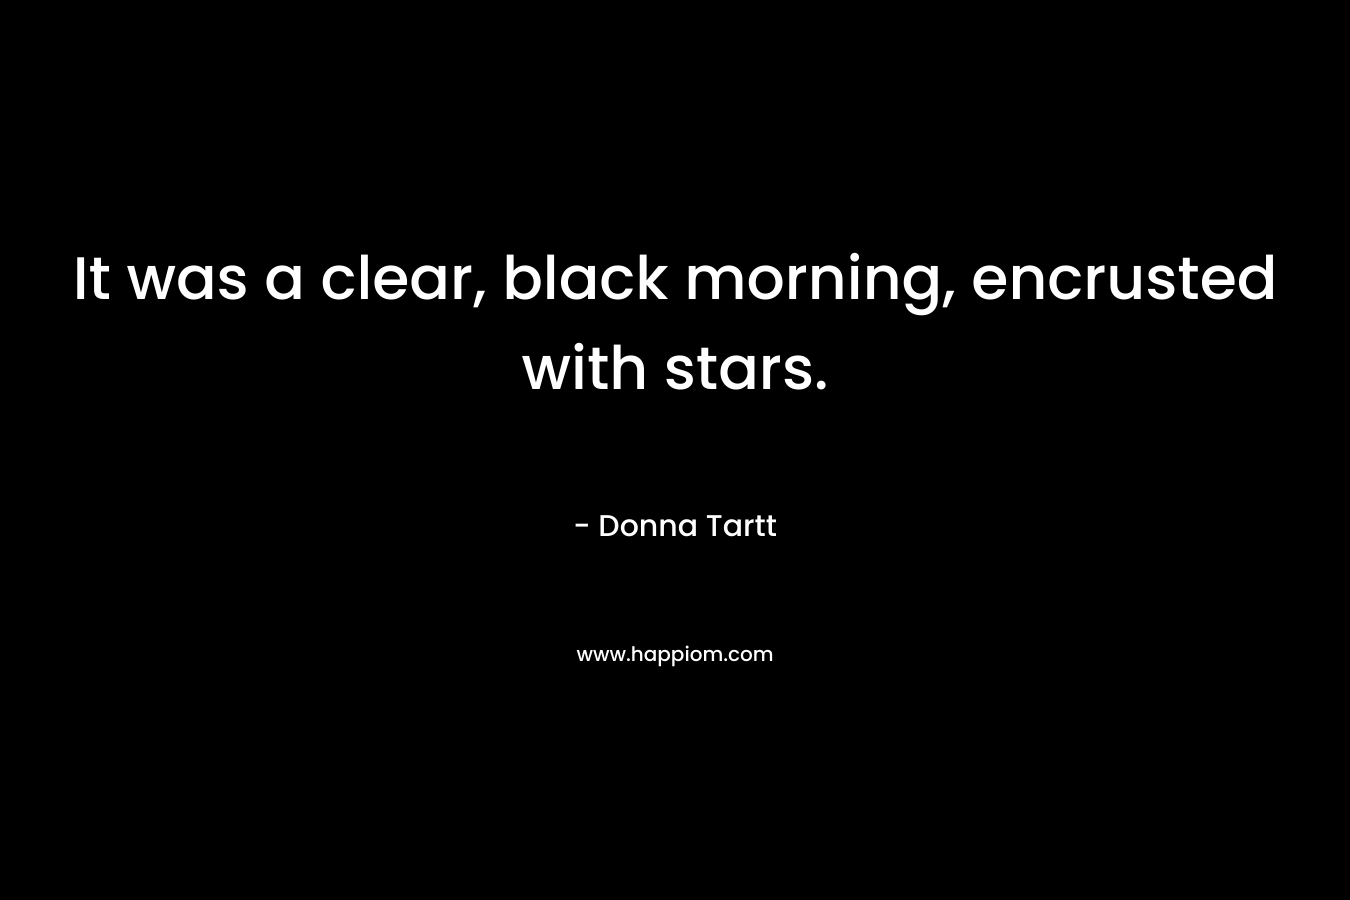 It was a clear, black morning, encrusted with stars. – Donna Tartt